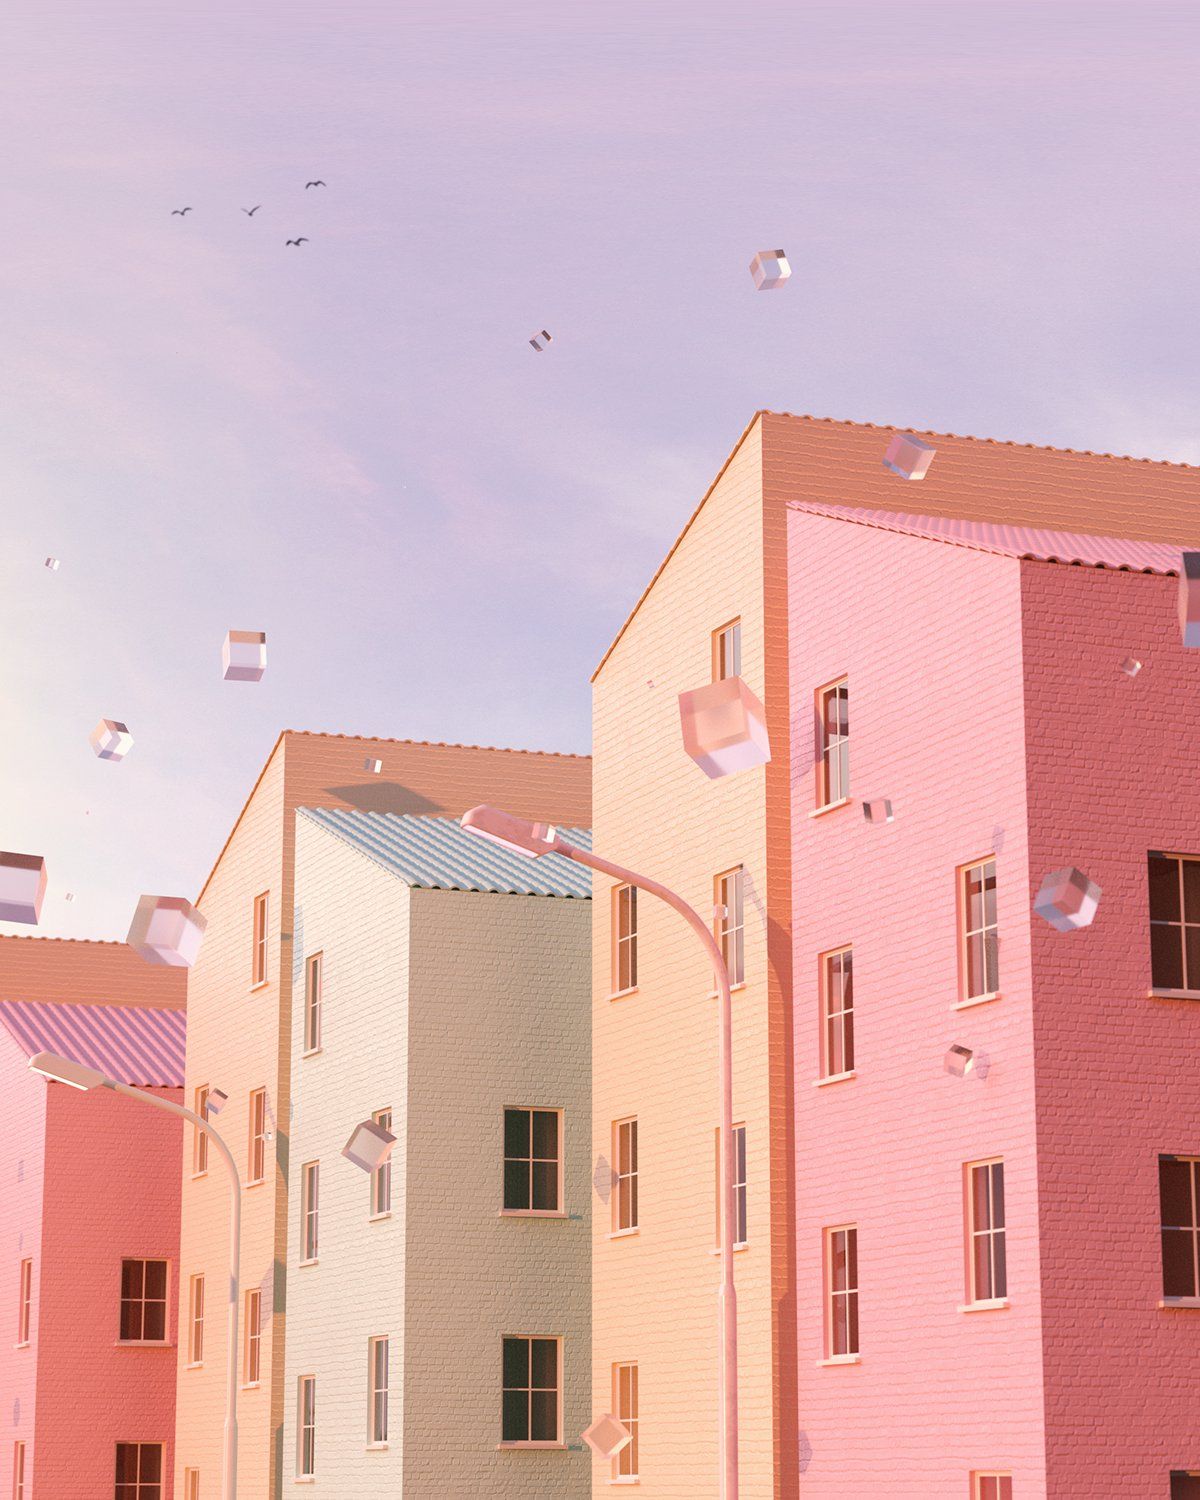 A pink building with many windows and balconies - Pastel, Danish, architecture